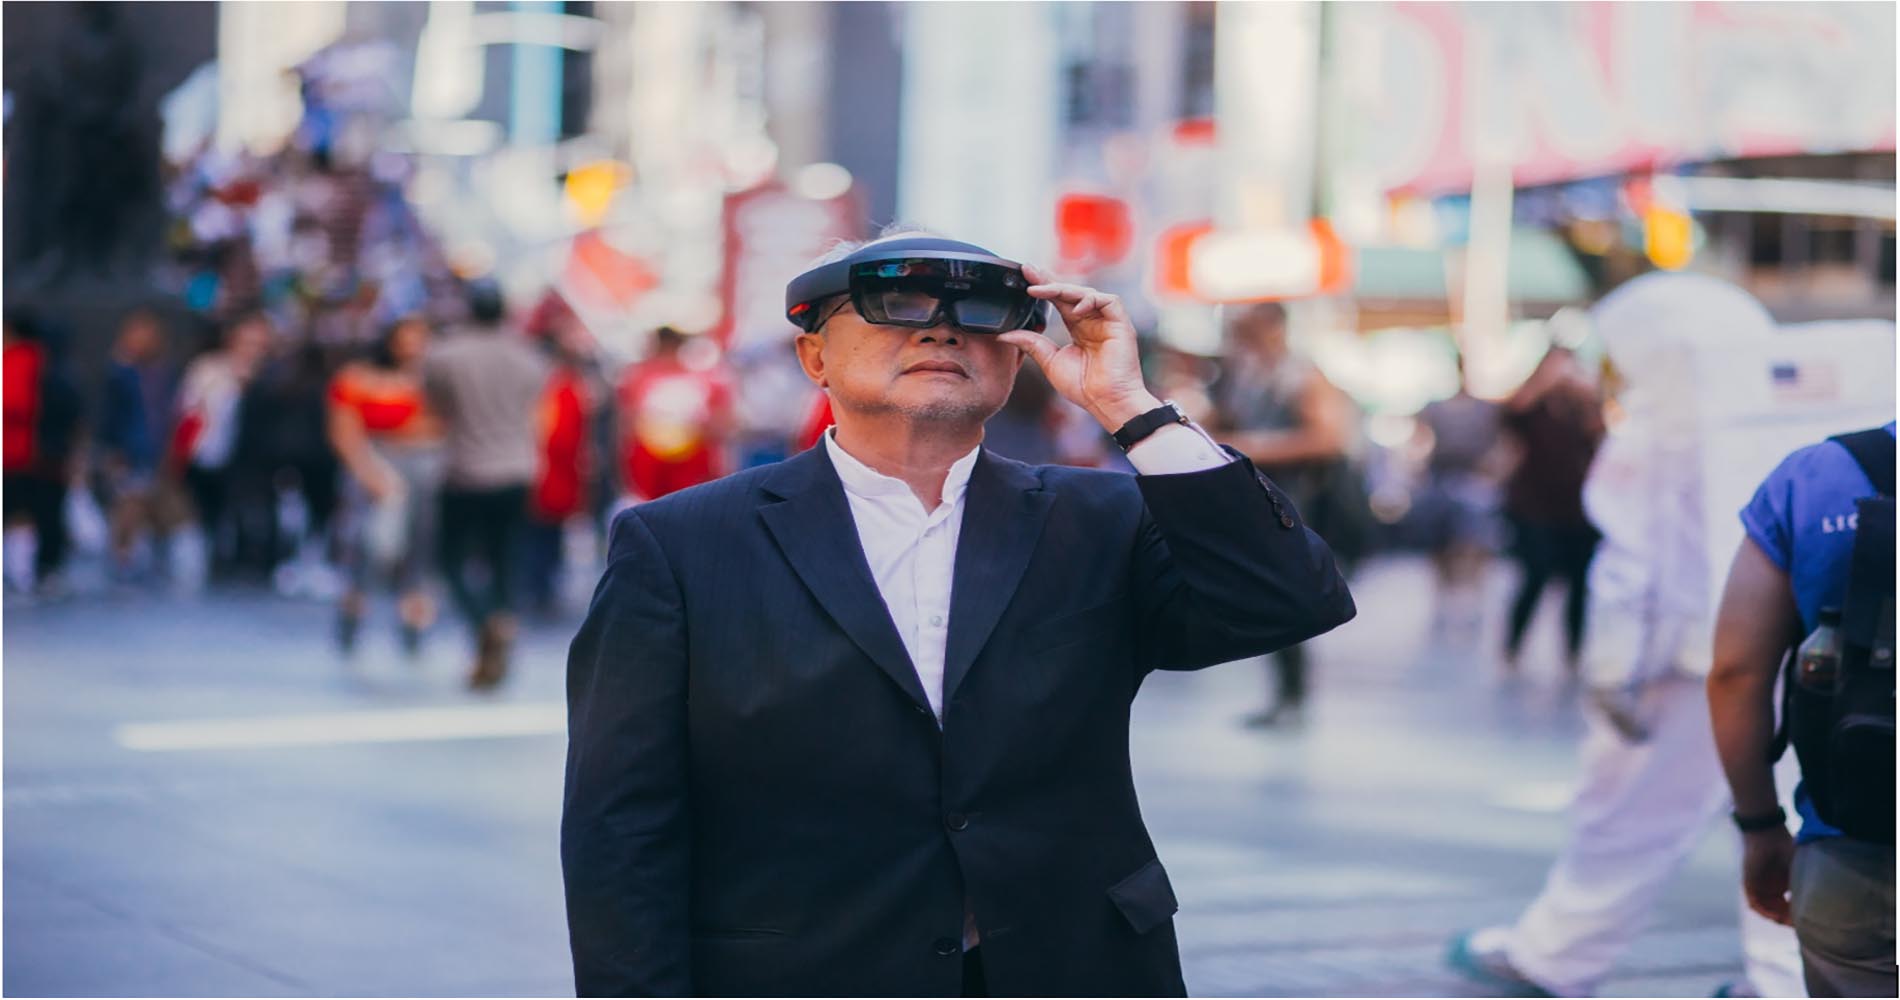 Elderly man tries on Microsoft HoloLens at Times Square.